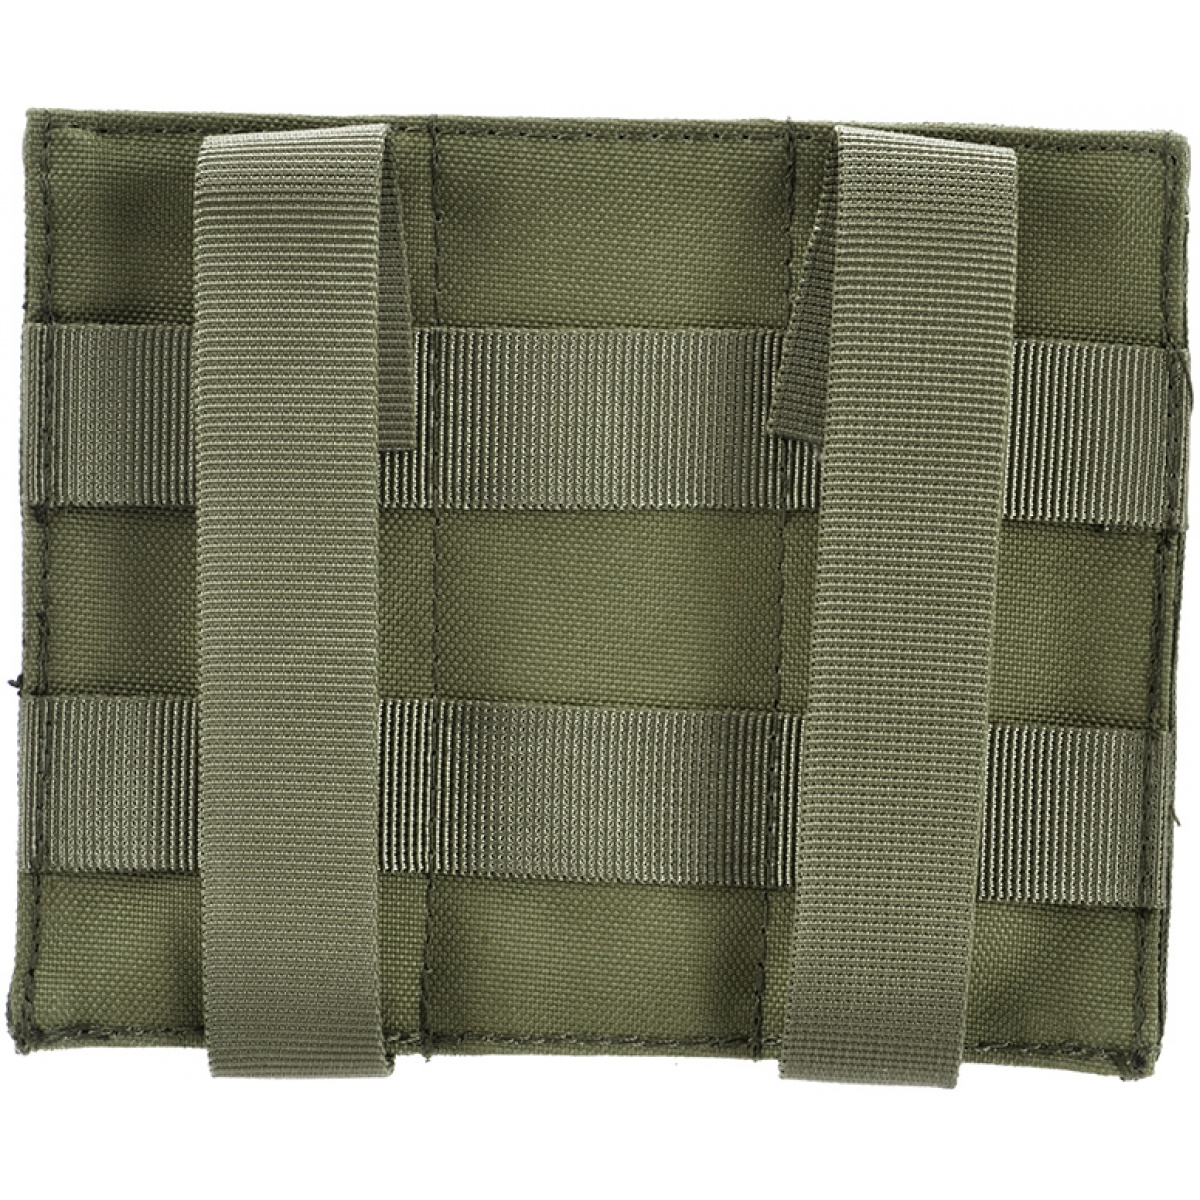 AMA Airsoft Tactical Triple Pistol Magazine Pouch - GREEN | Airsoft ...